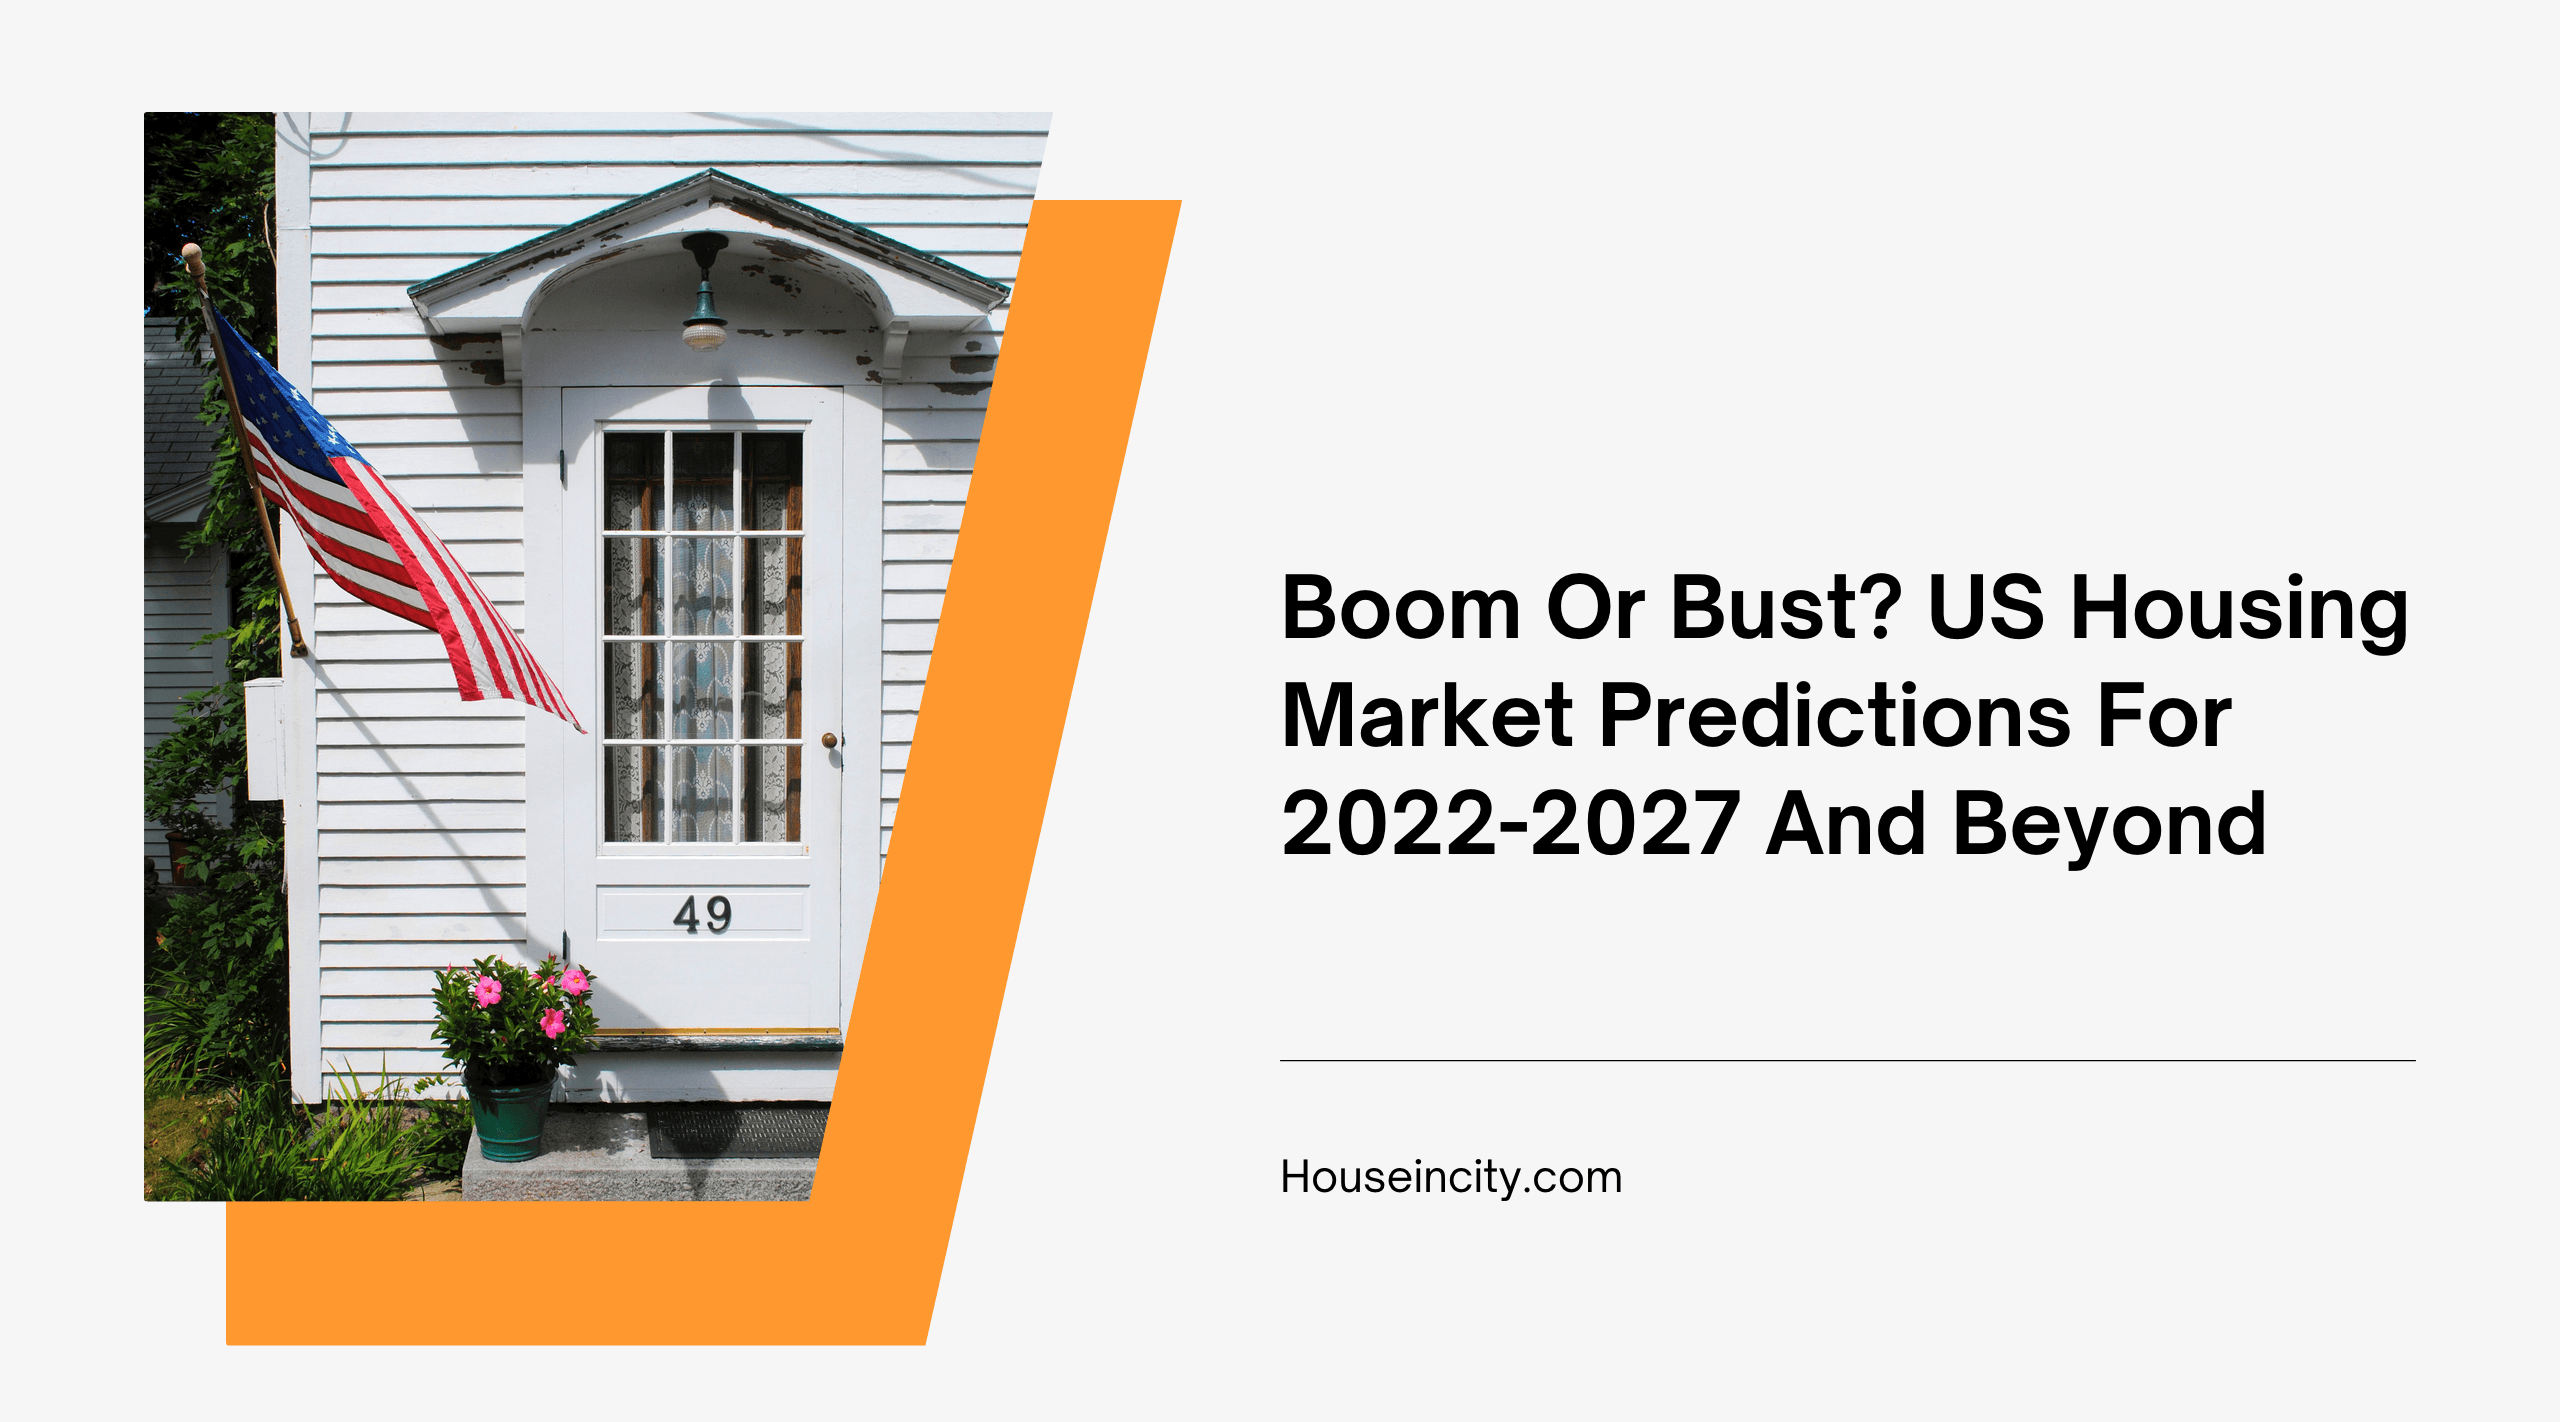 The US Housing Market Over The Next Few Years: Boom Or Bust?